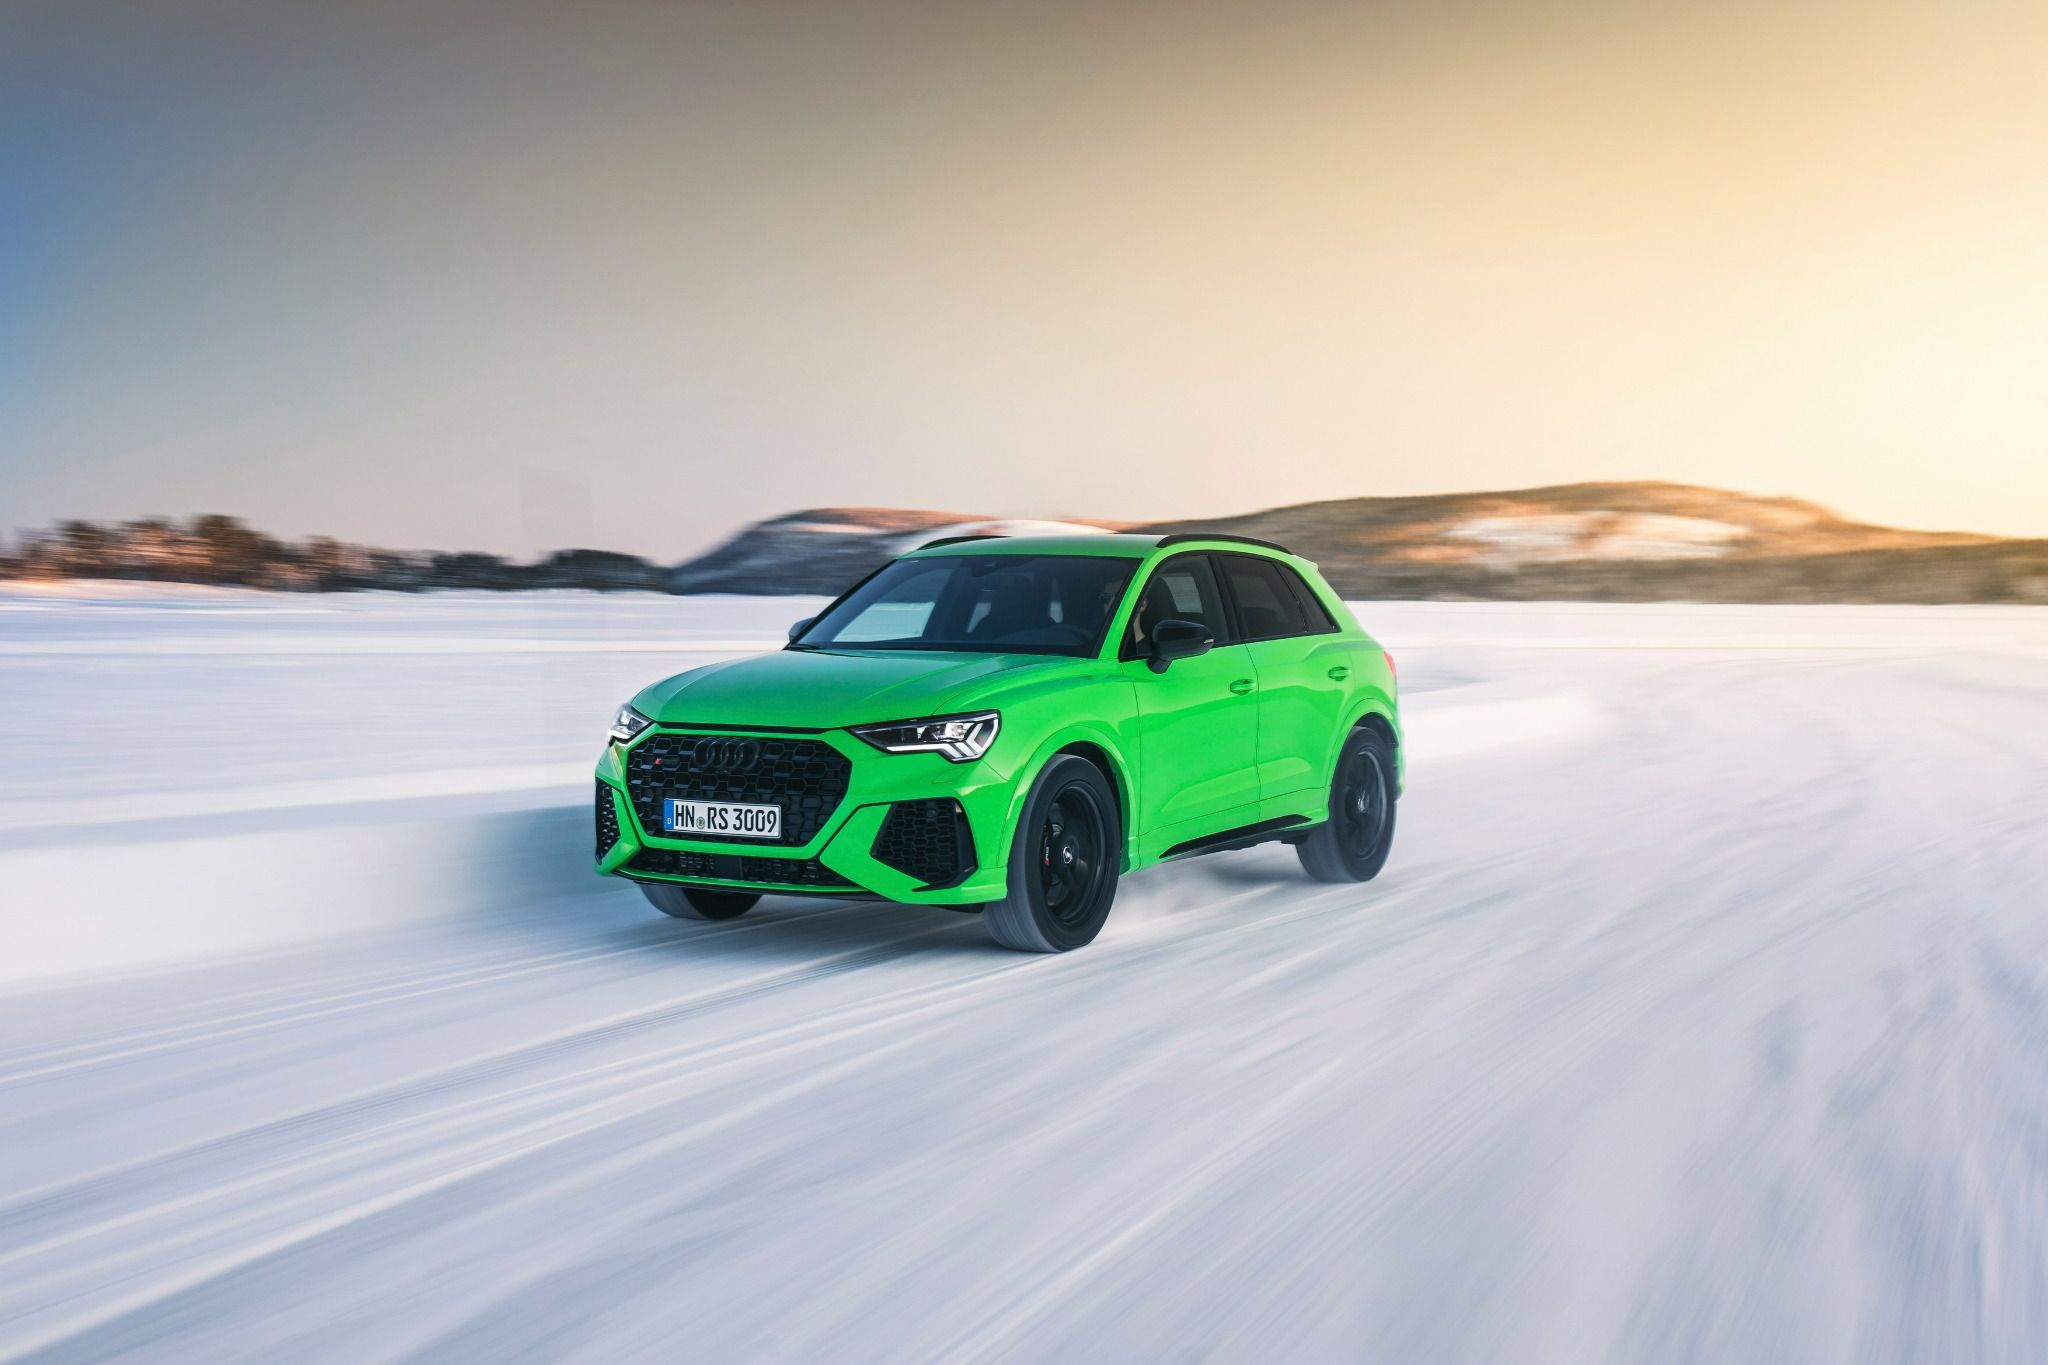 Audi RSQ3 driving on a snowy road